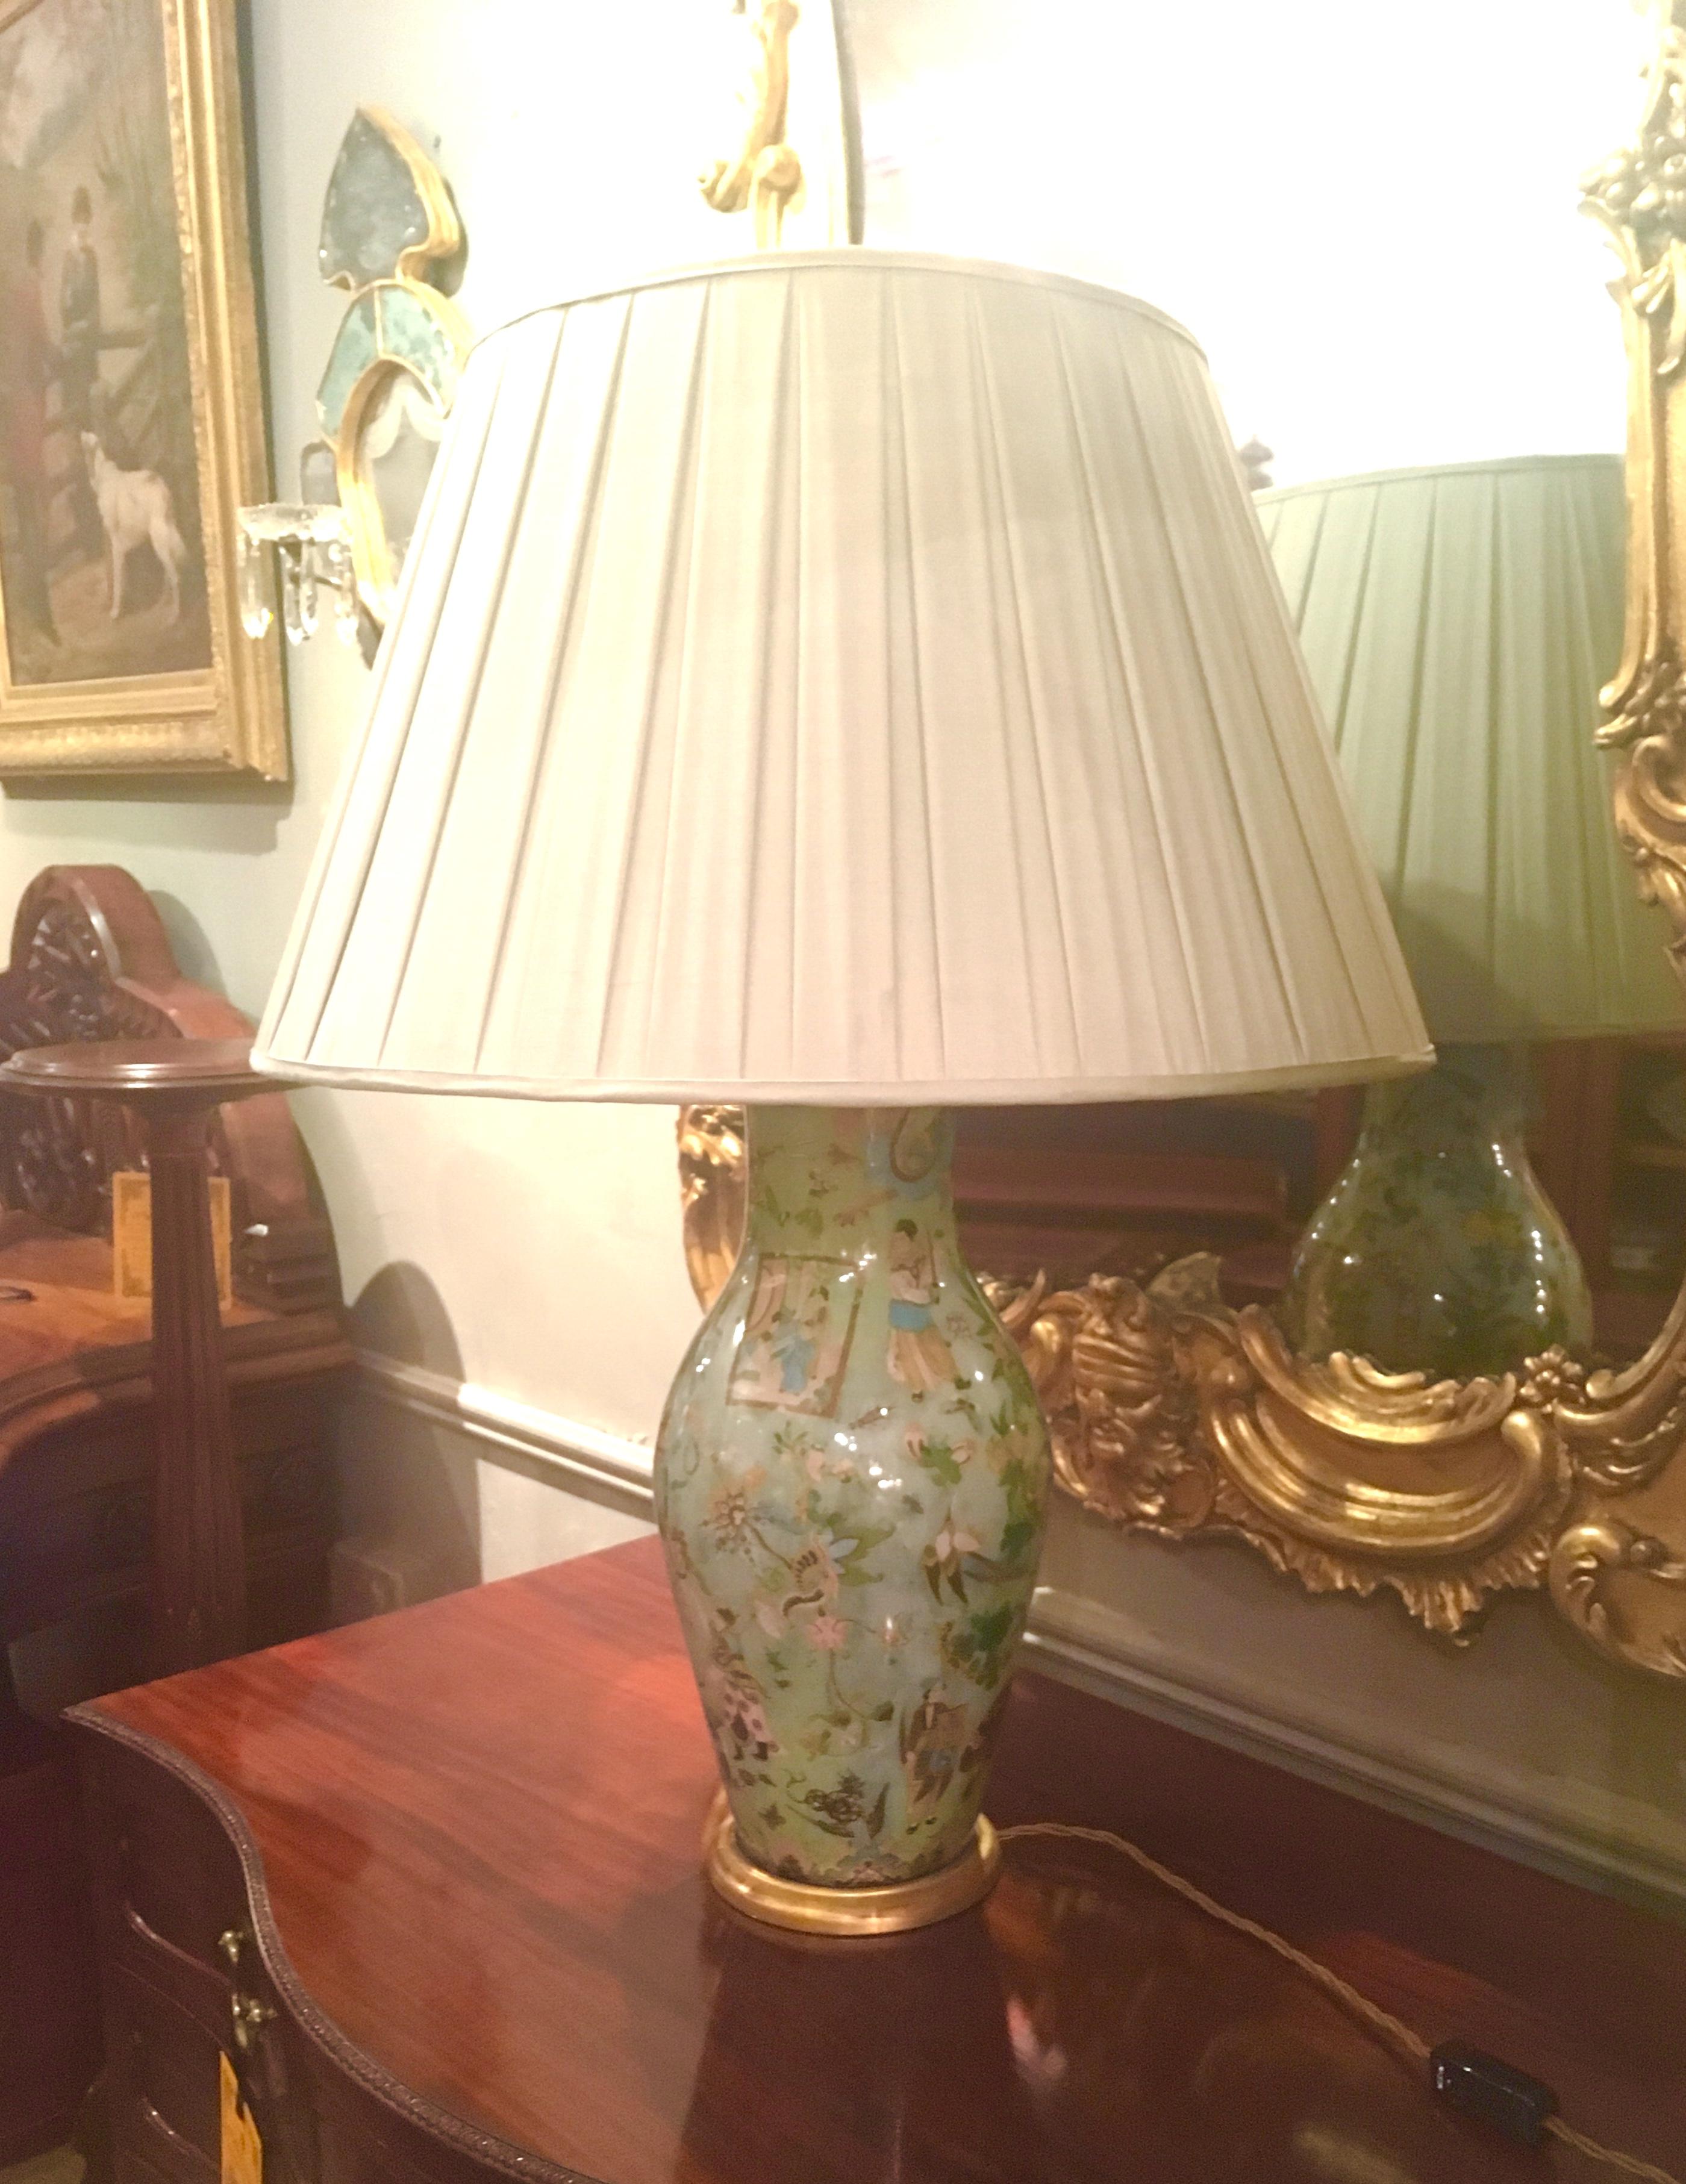 Early 20th Century Decalcomania Vase Lamp In Excellent Condition For Sale In Dublin 8, IE